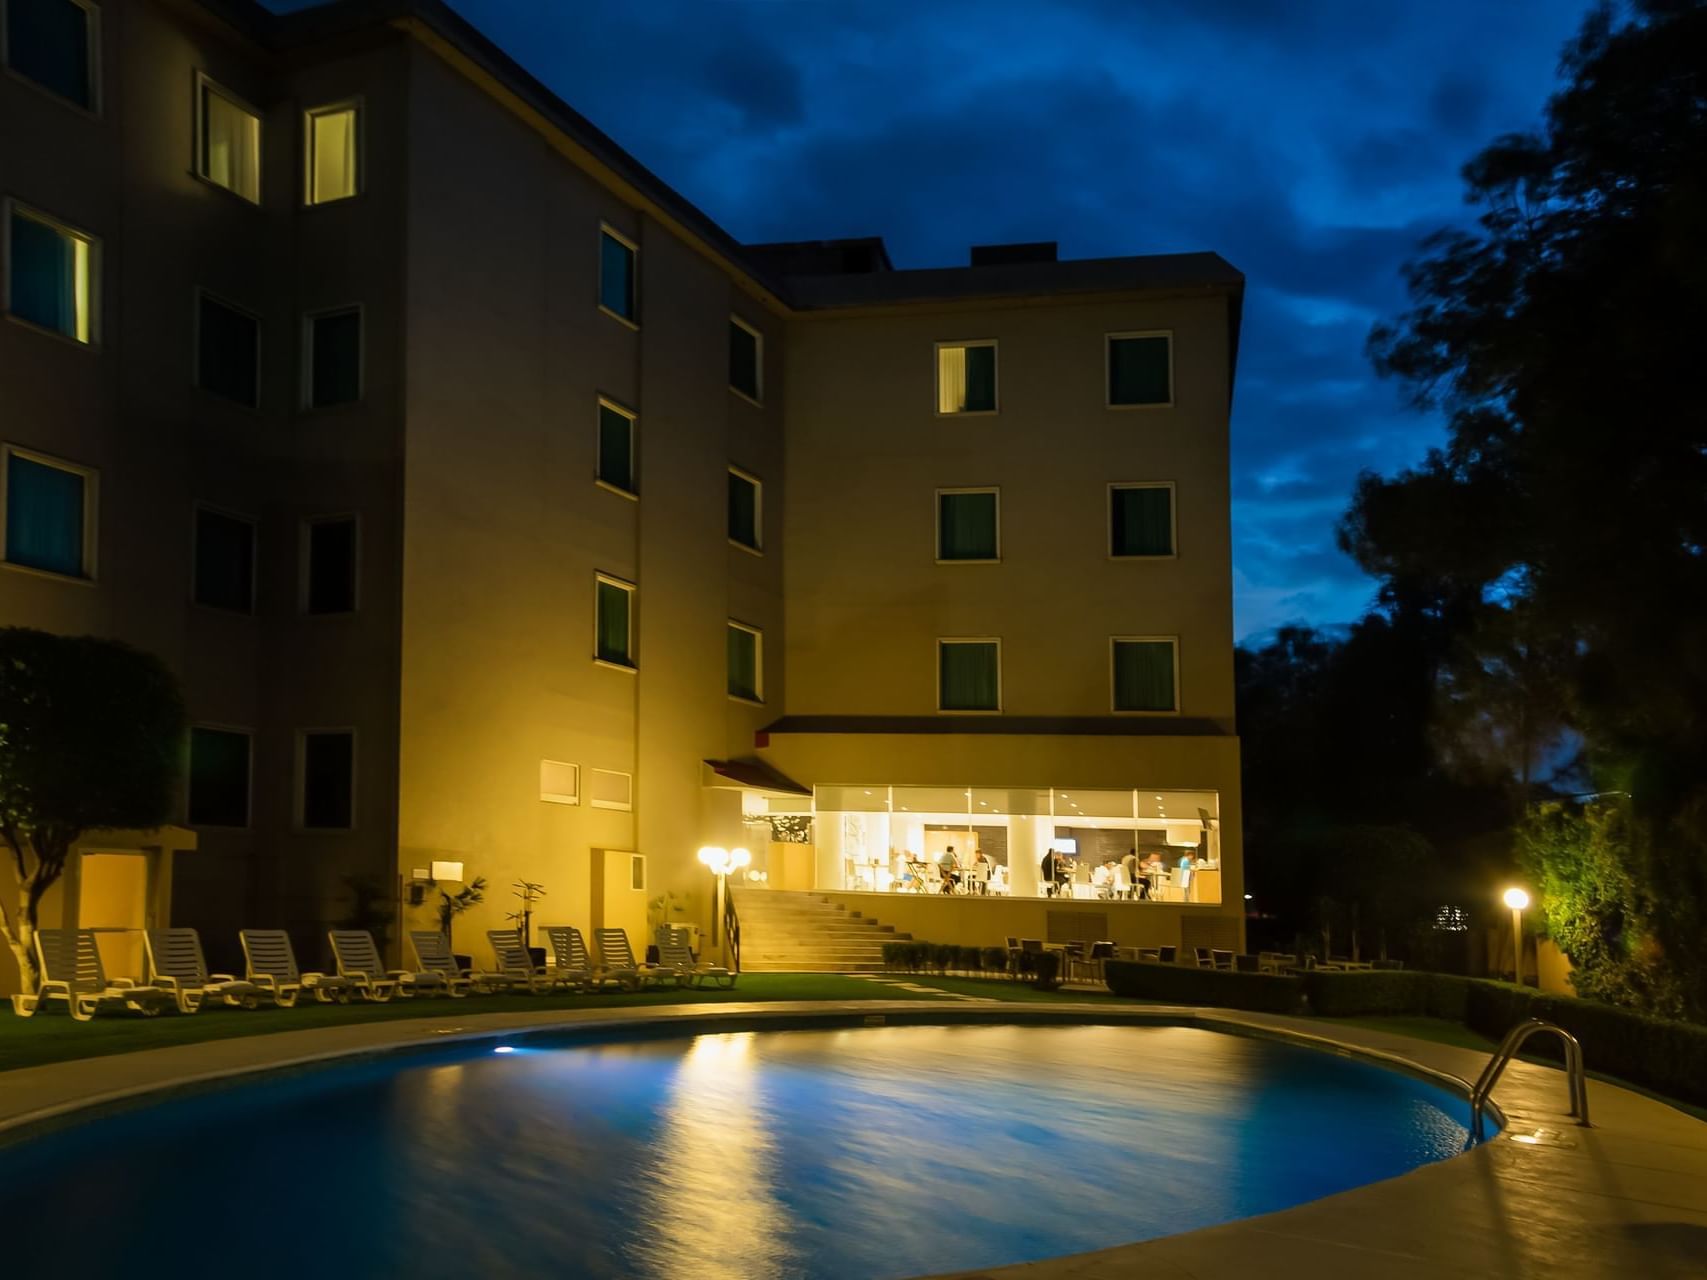 Night view of the outdoor swimming pool area at Fiesta Inn